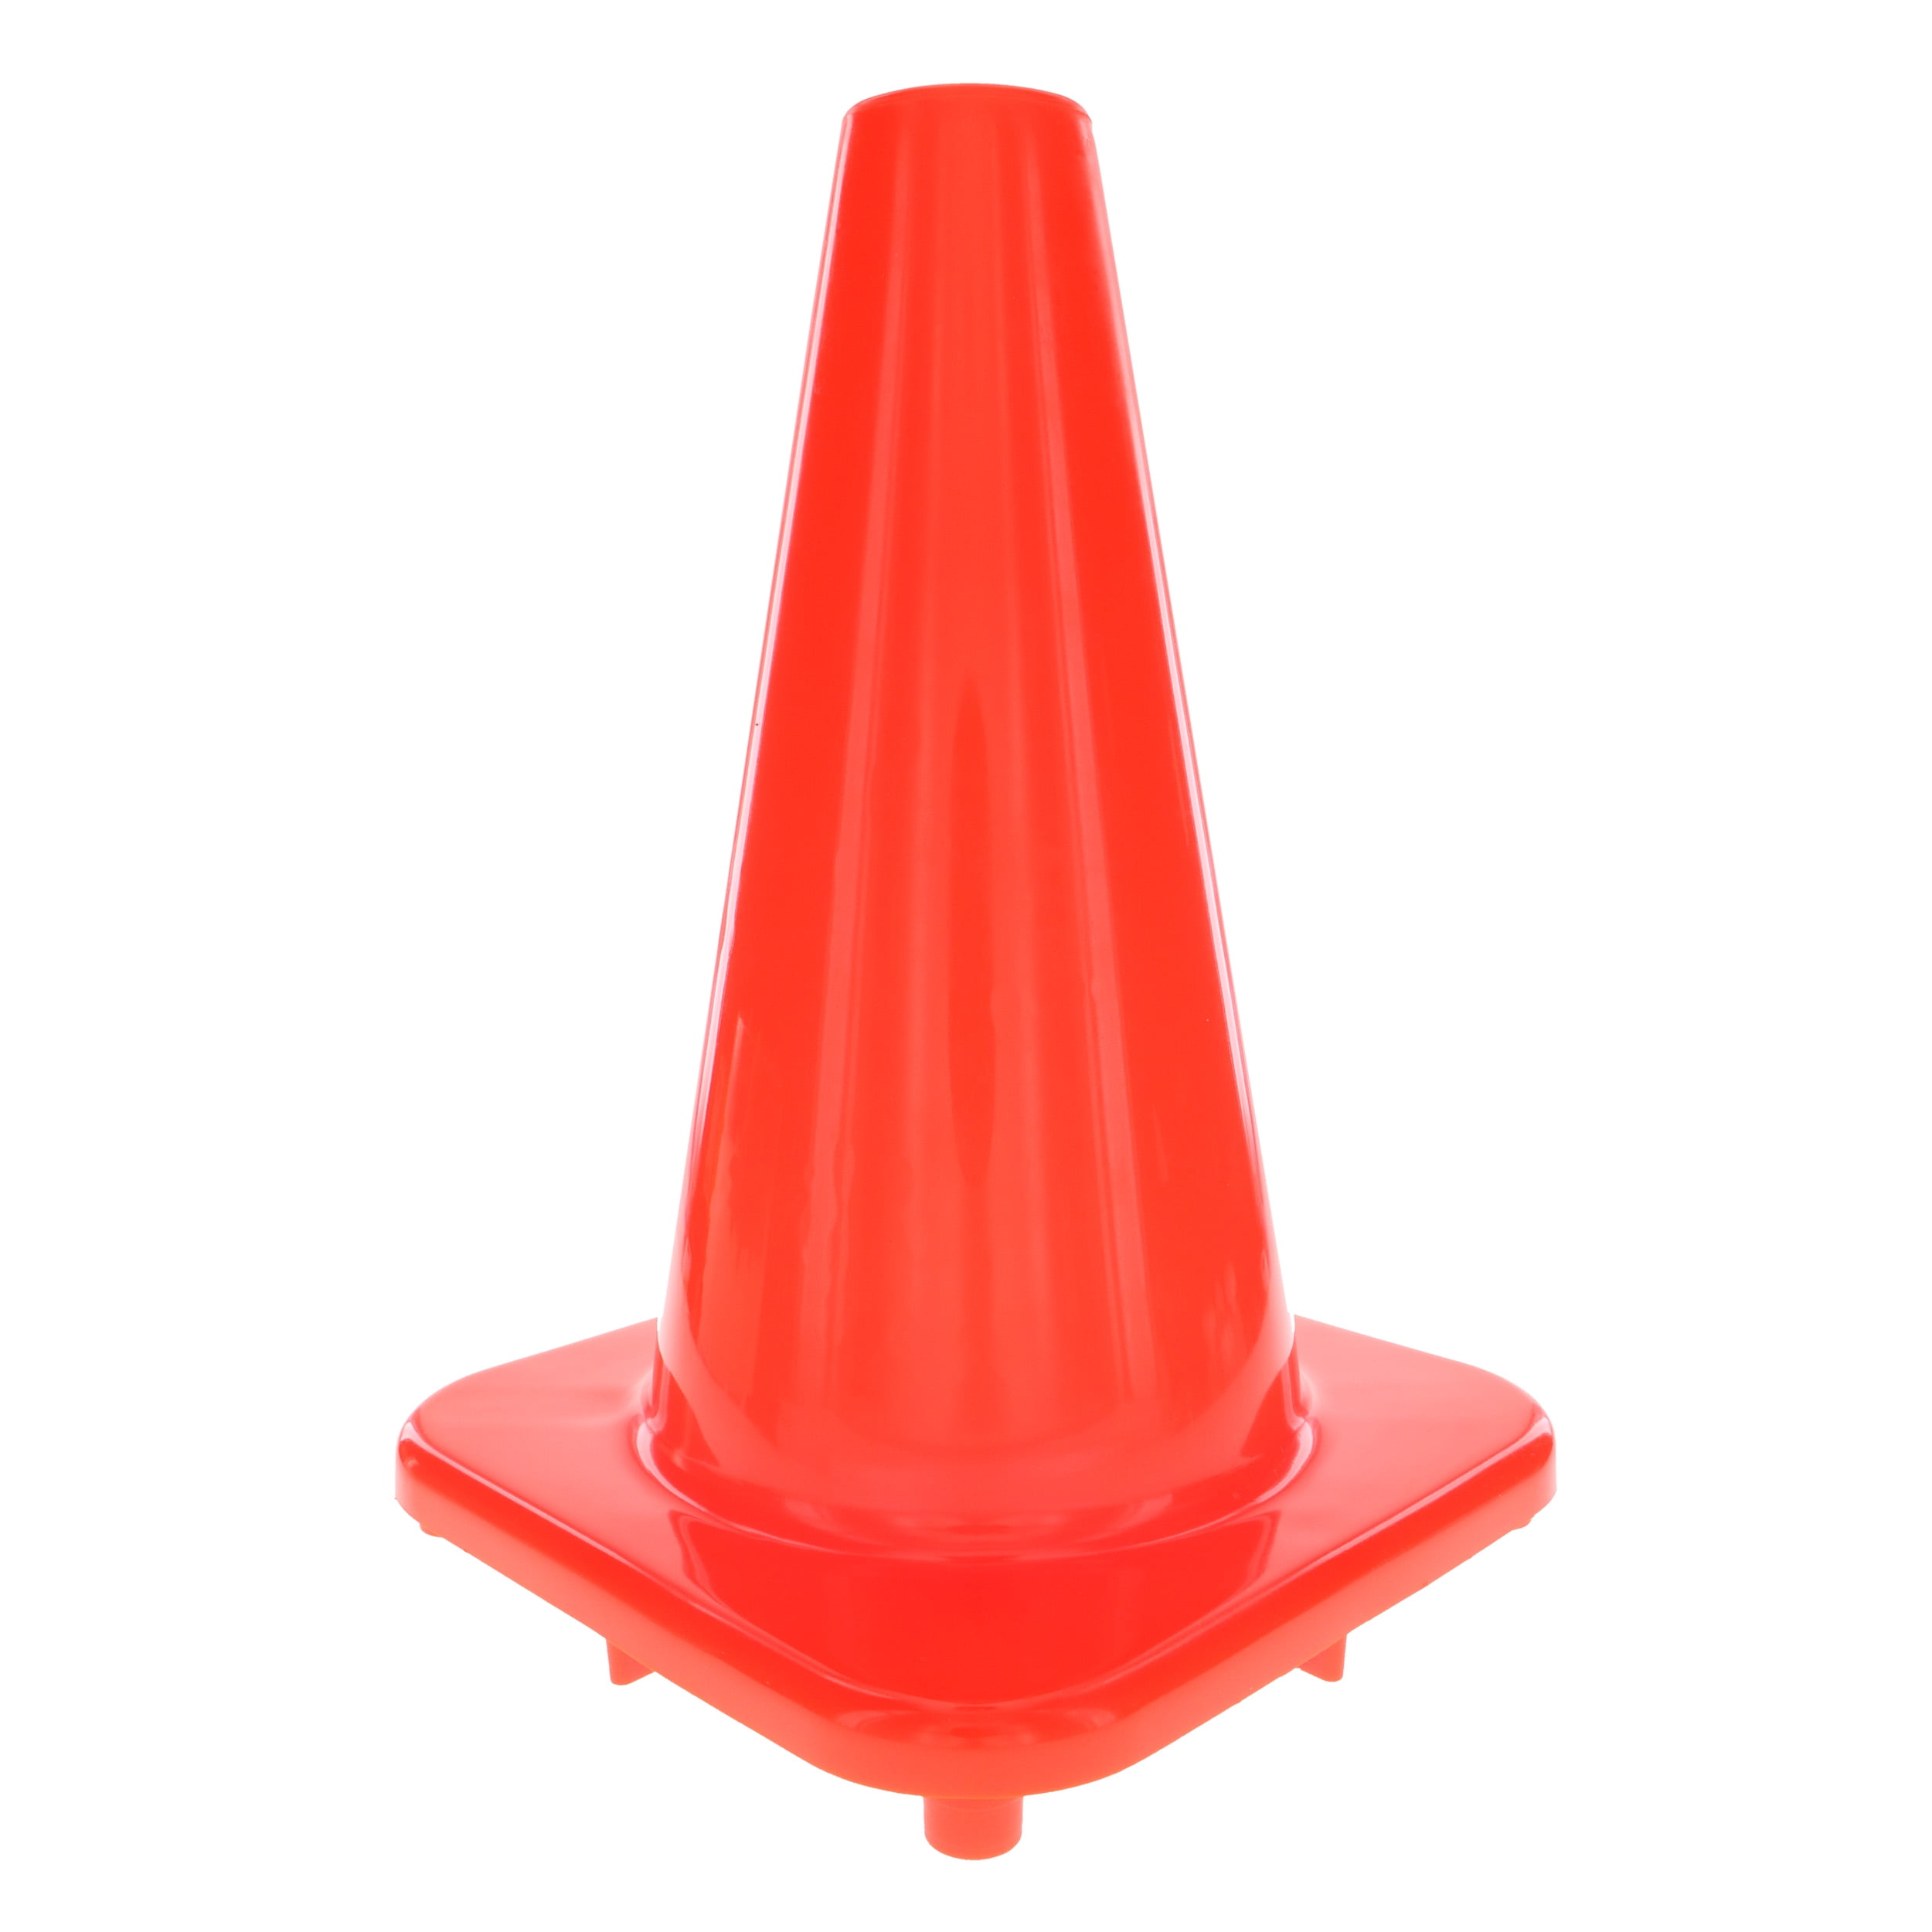 Hyper Tough Orange Synthetic Rubber Safety Cone, 12 inches, 1 Cone